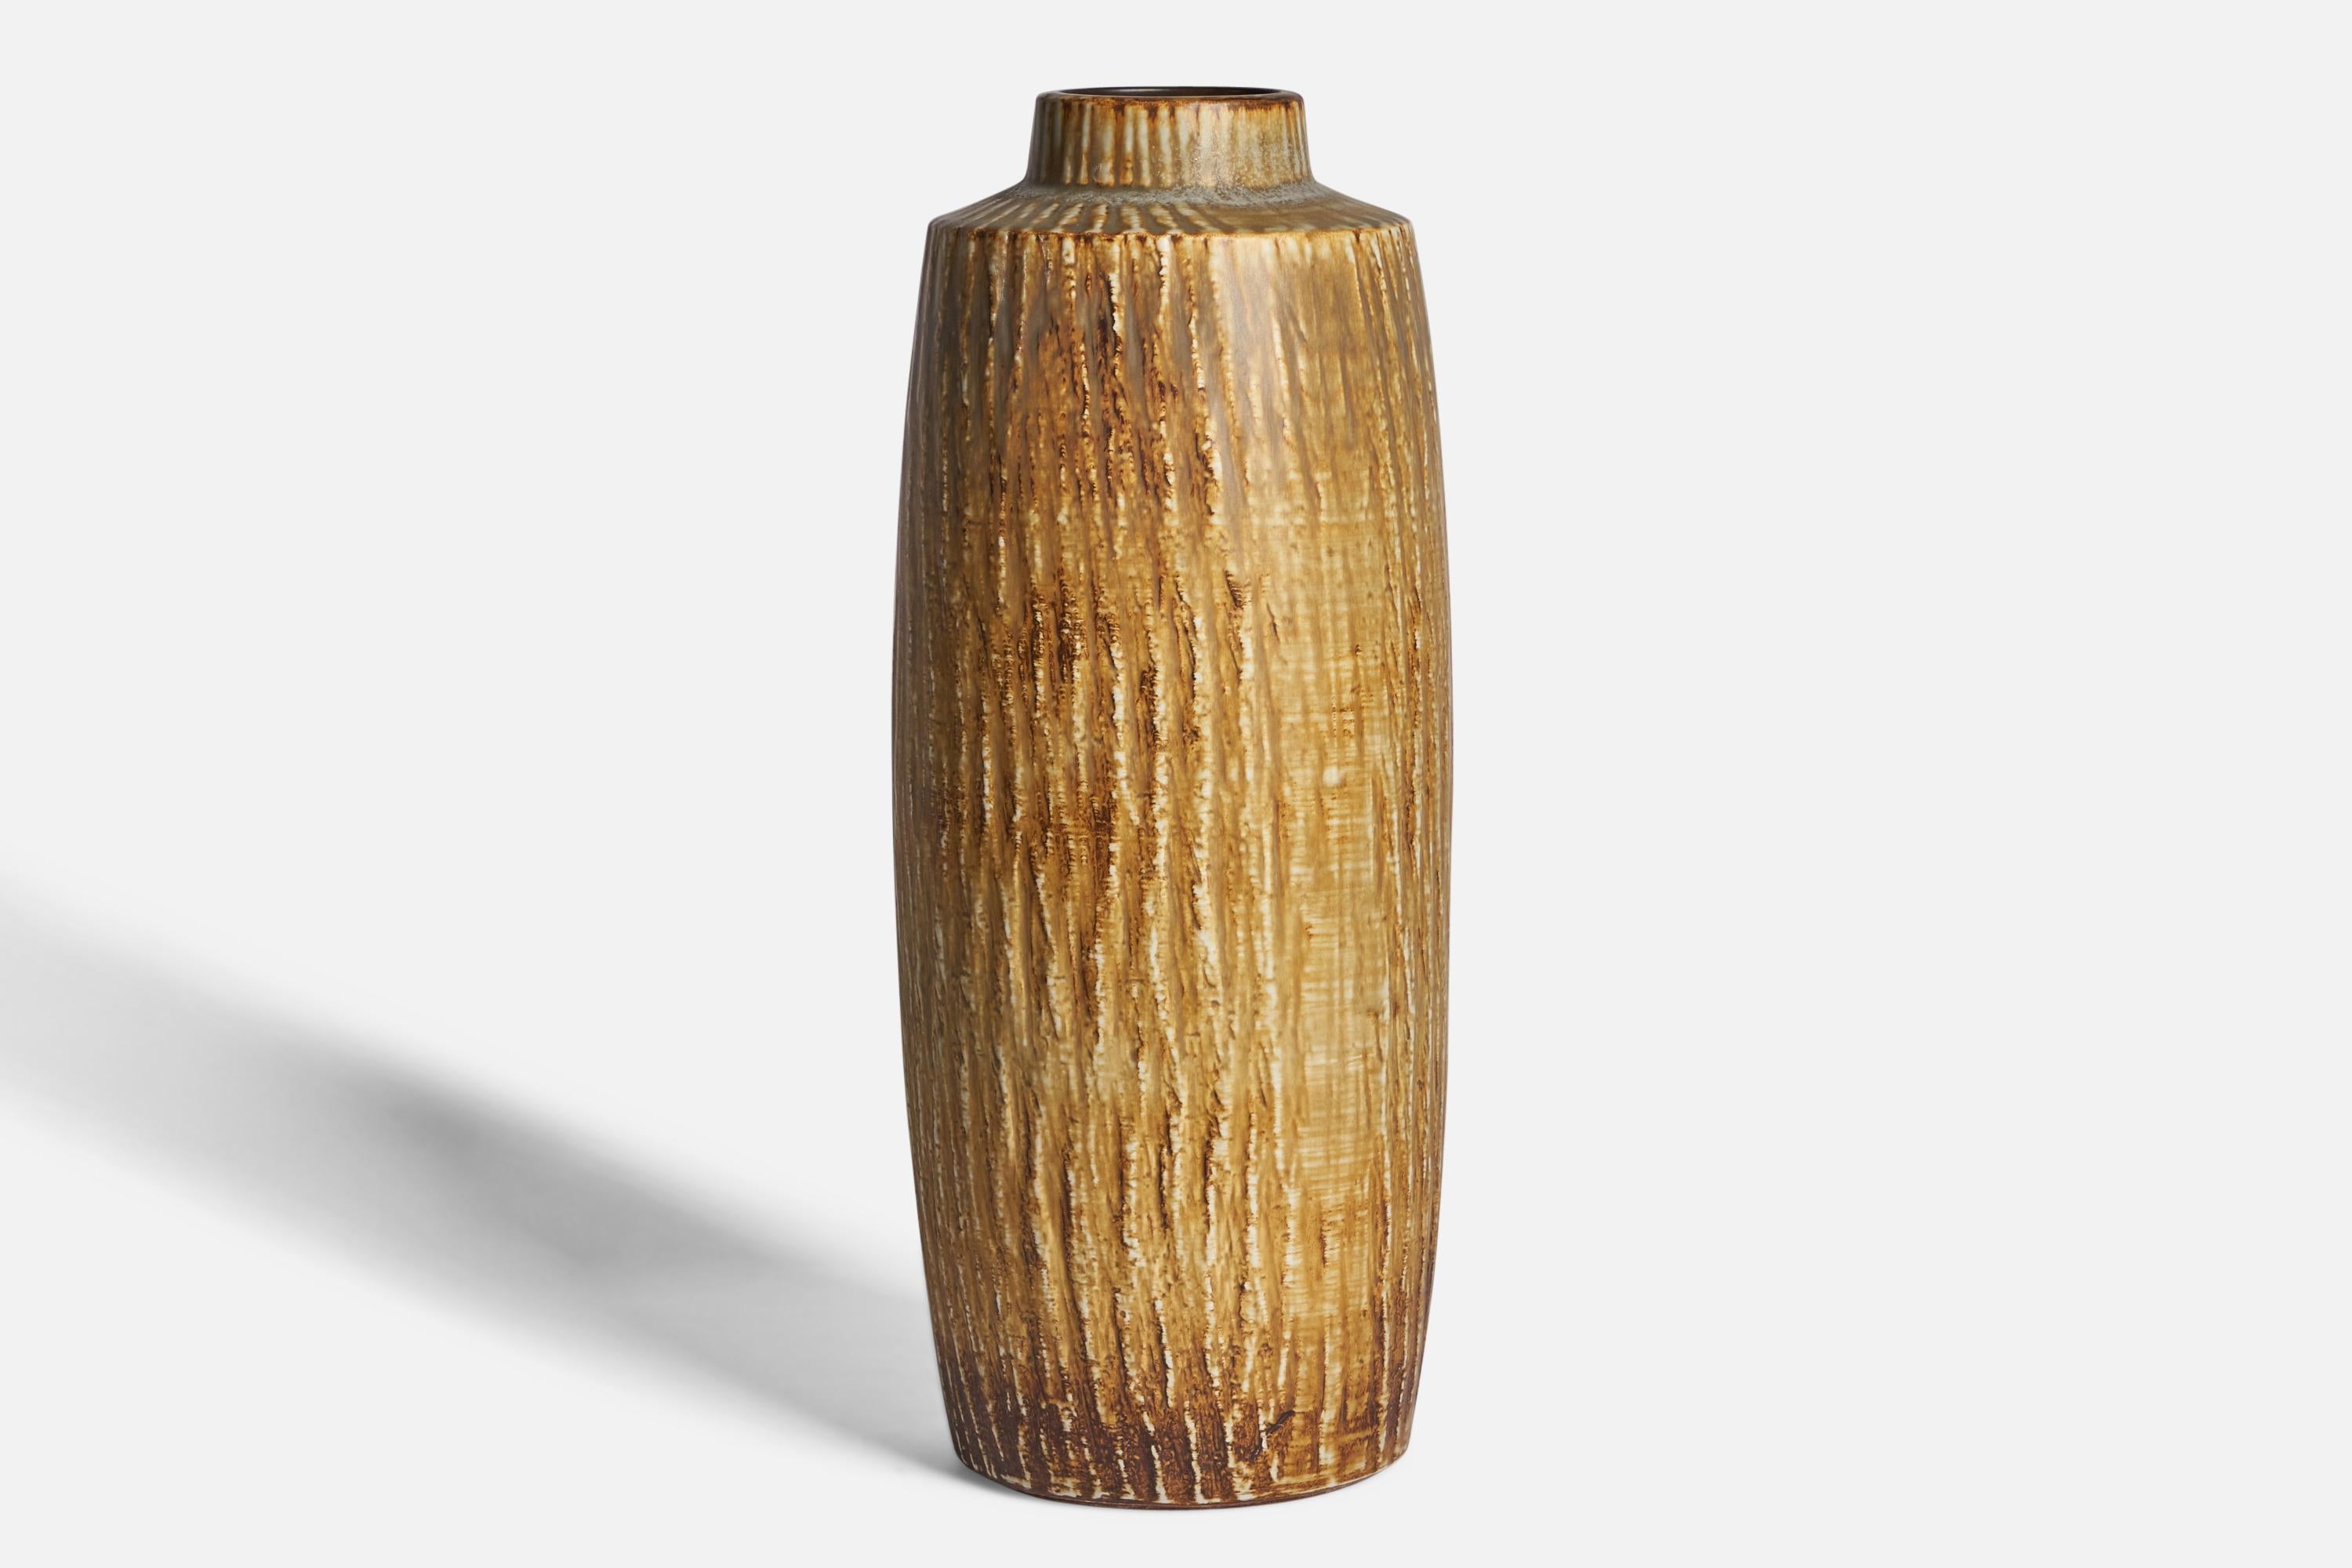 A floor vase designed by Gunnar Nylund and produced by Rörstrand, Sweden, 1940s.